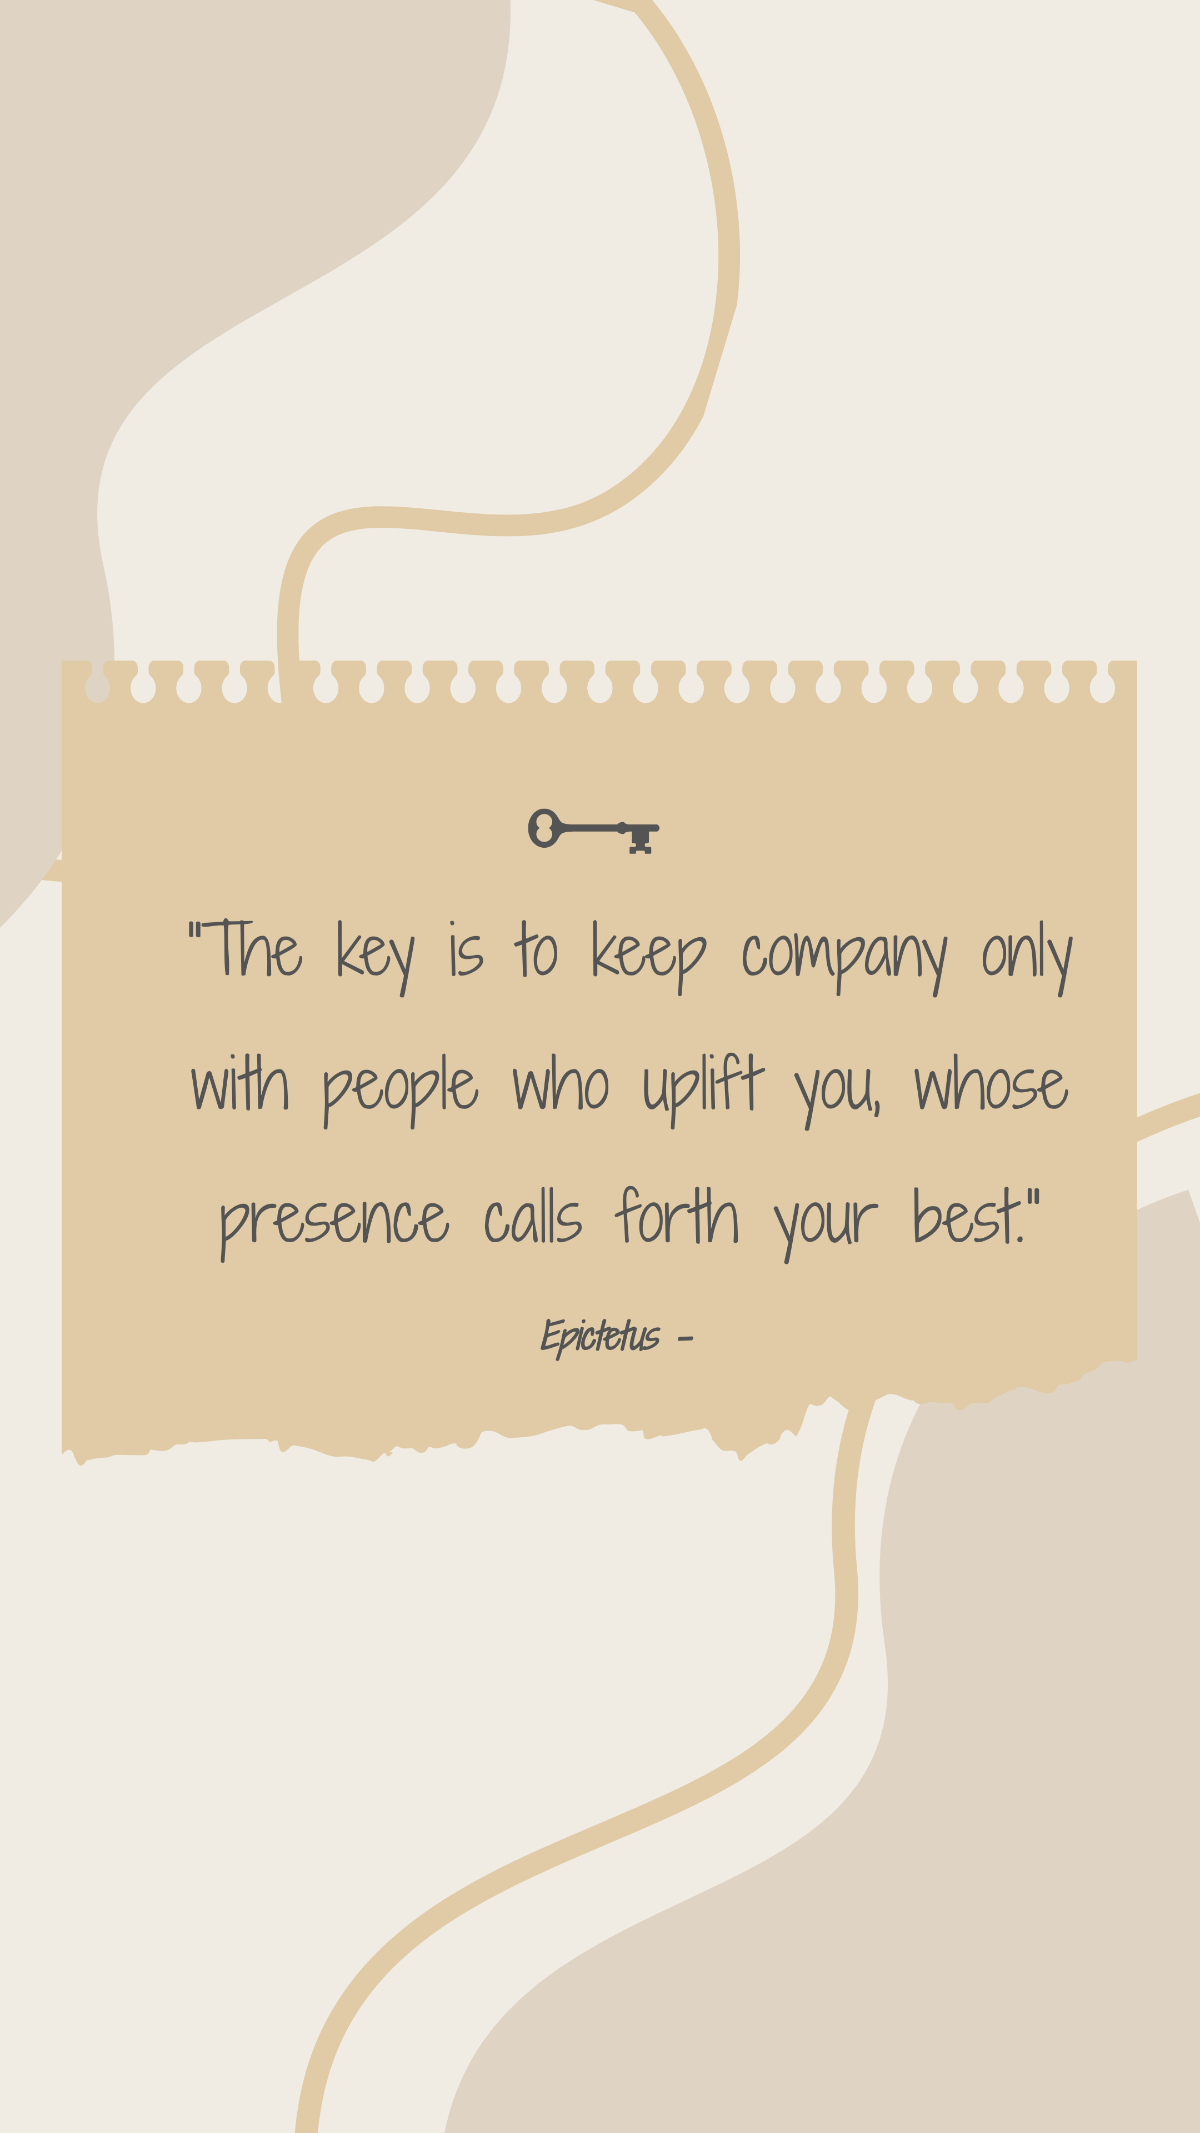 Epictetus - The key is to keep company only with people who uplift you, whose presence calls forth your best.